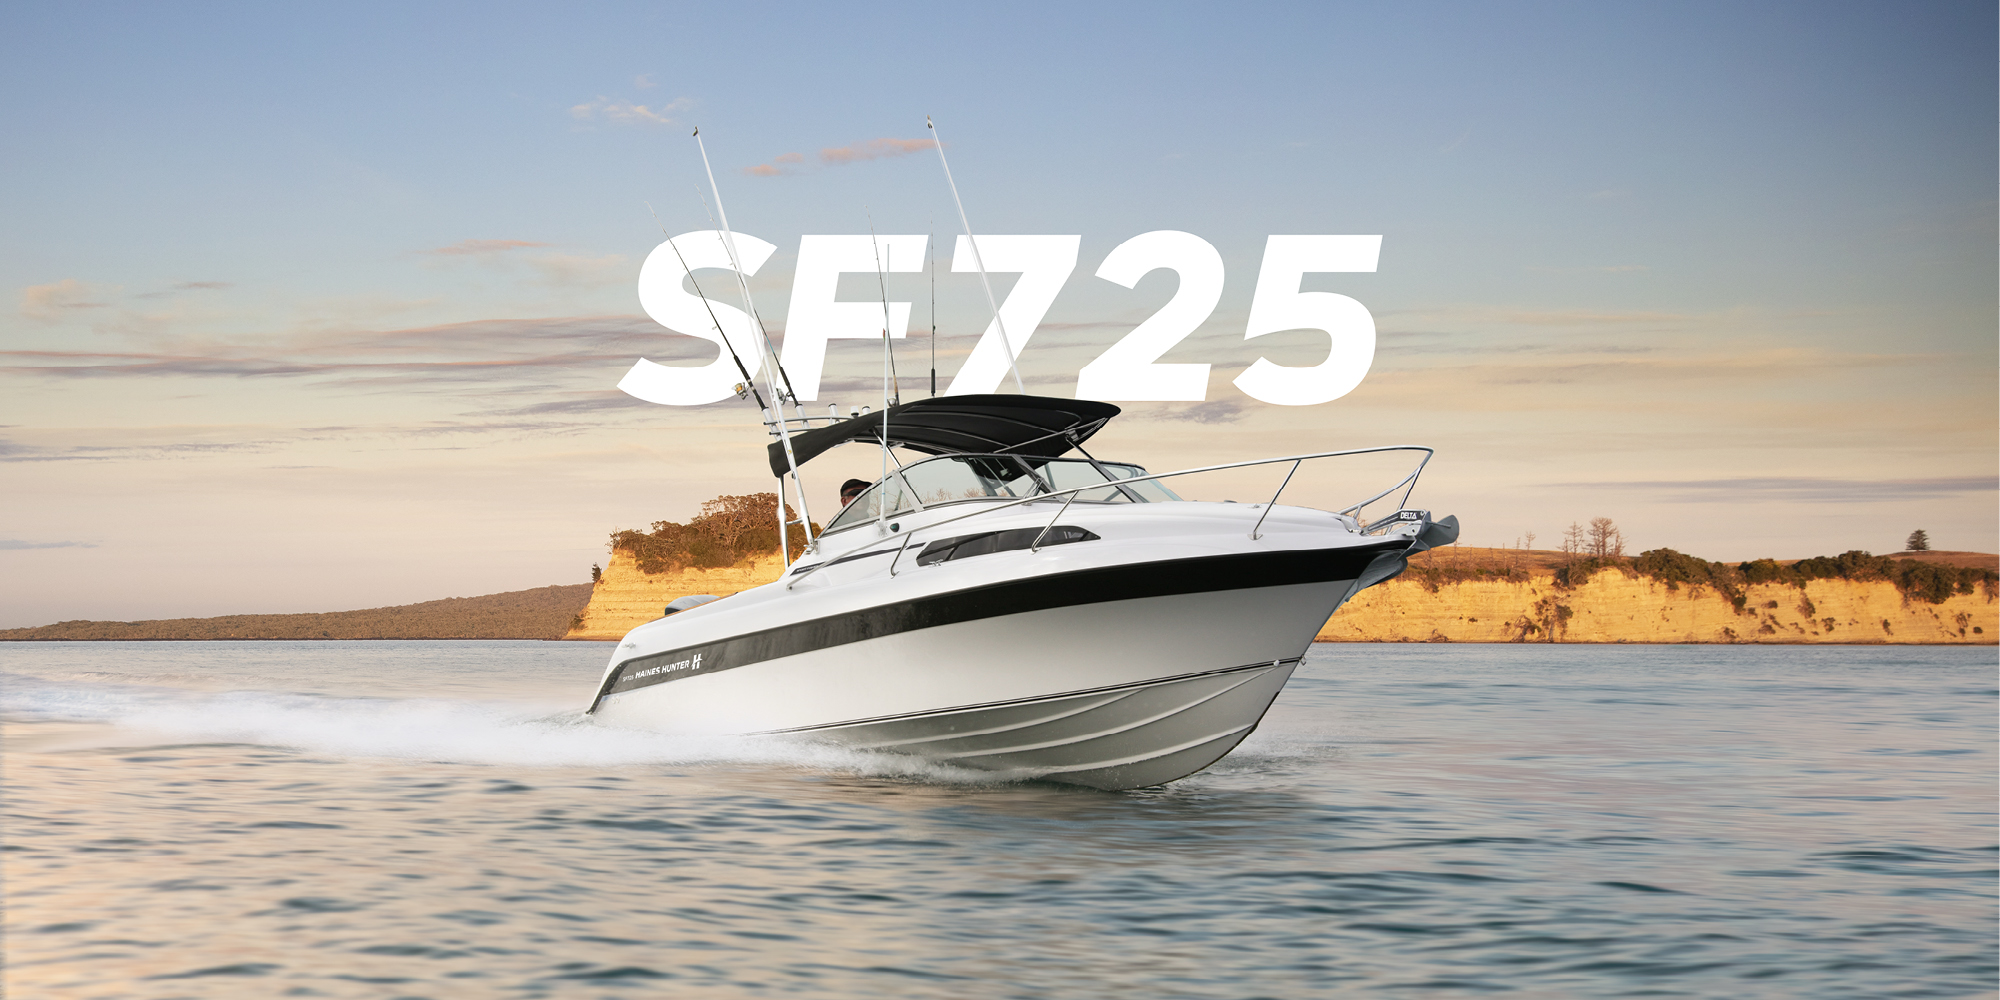 SF725 Sport Fisher | Haines Hunter